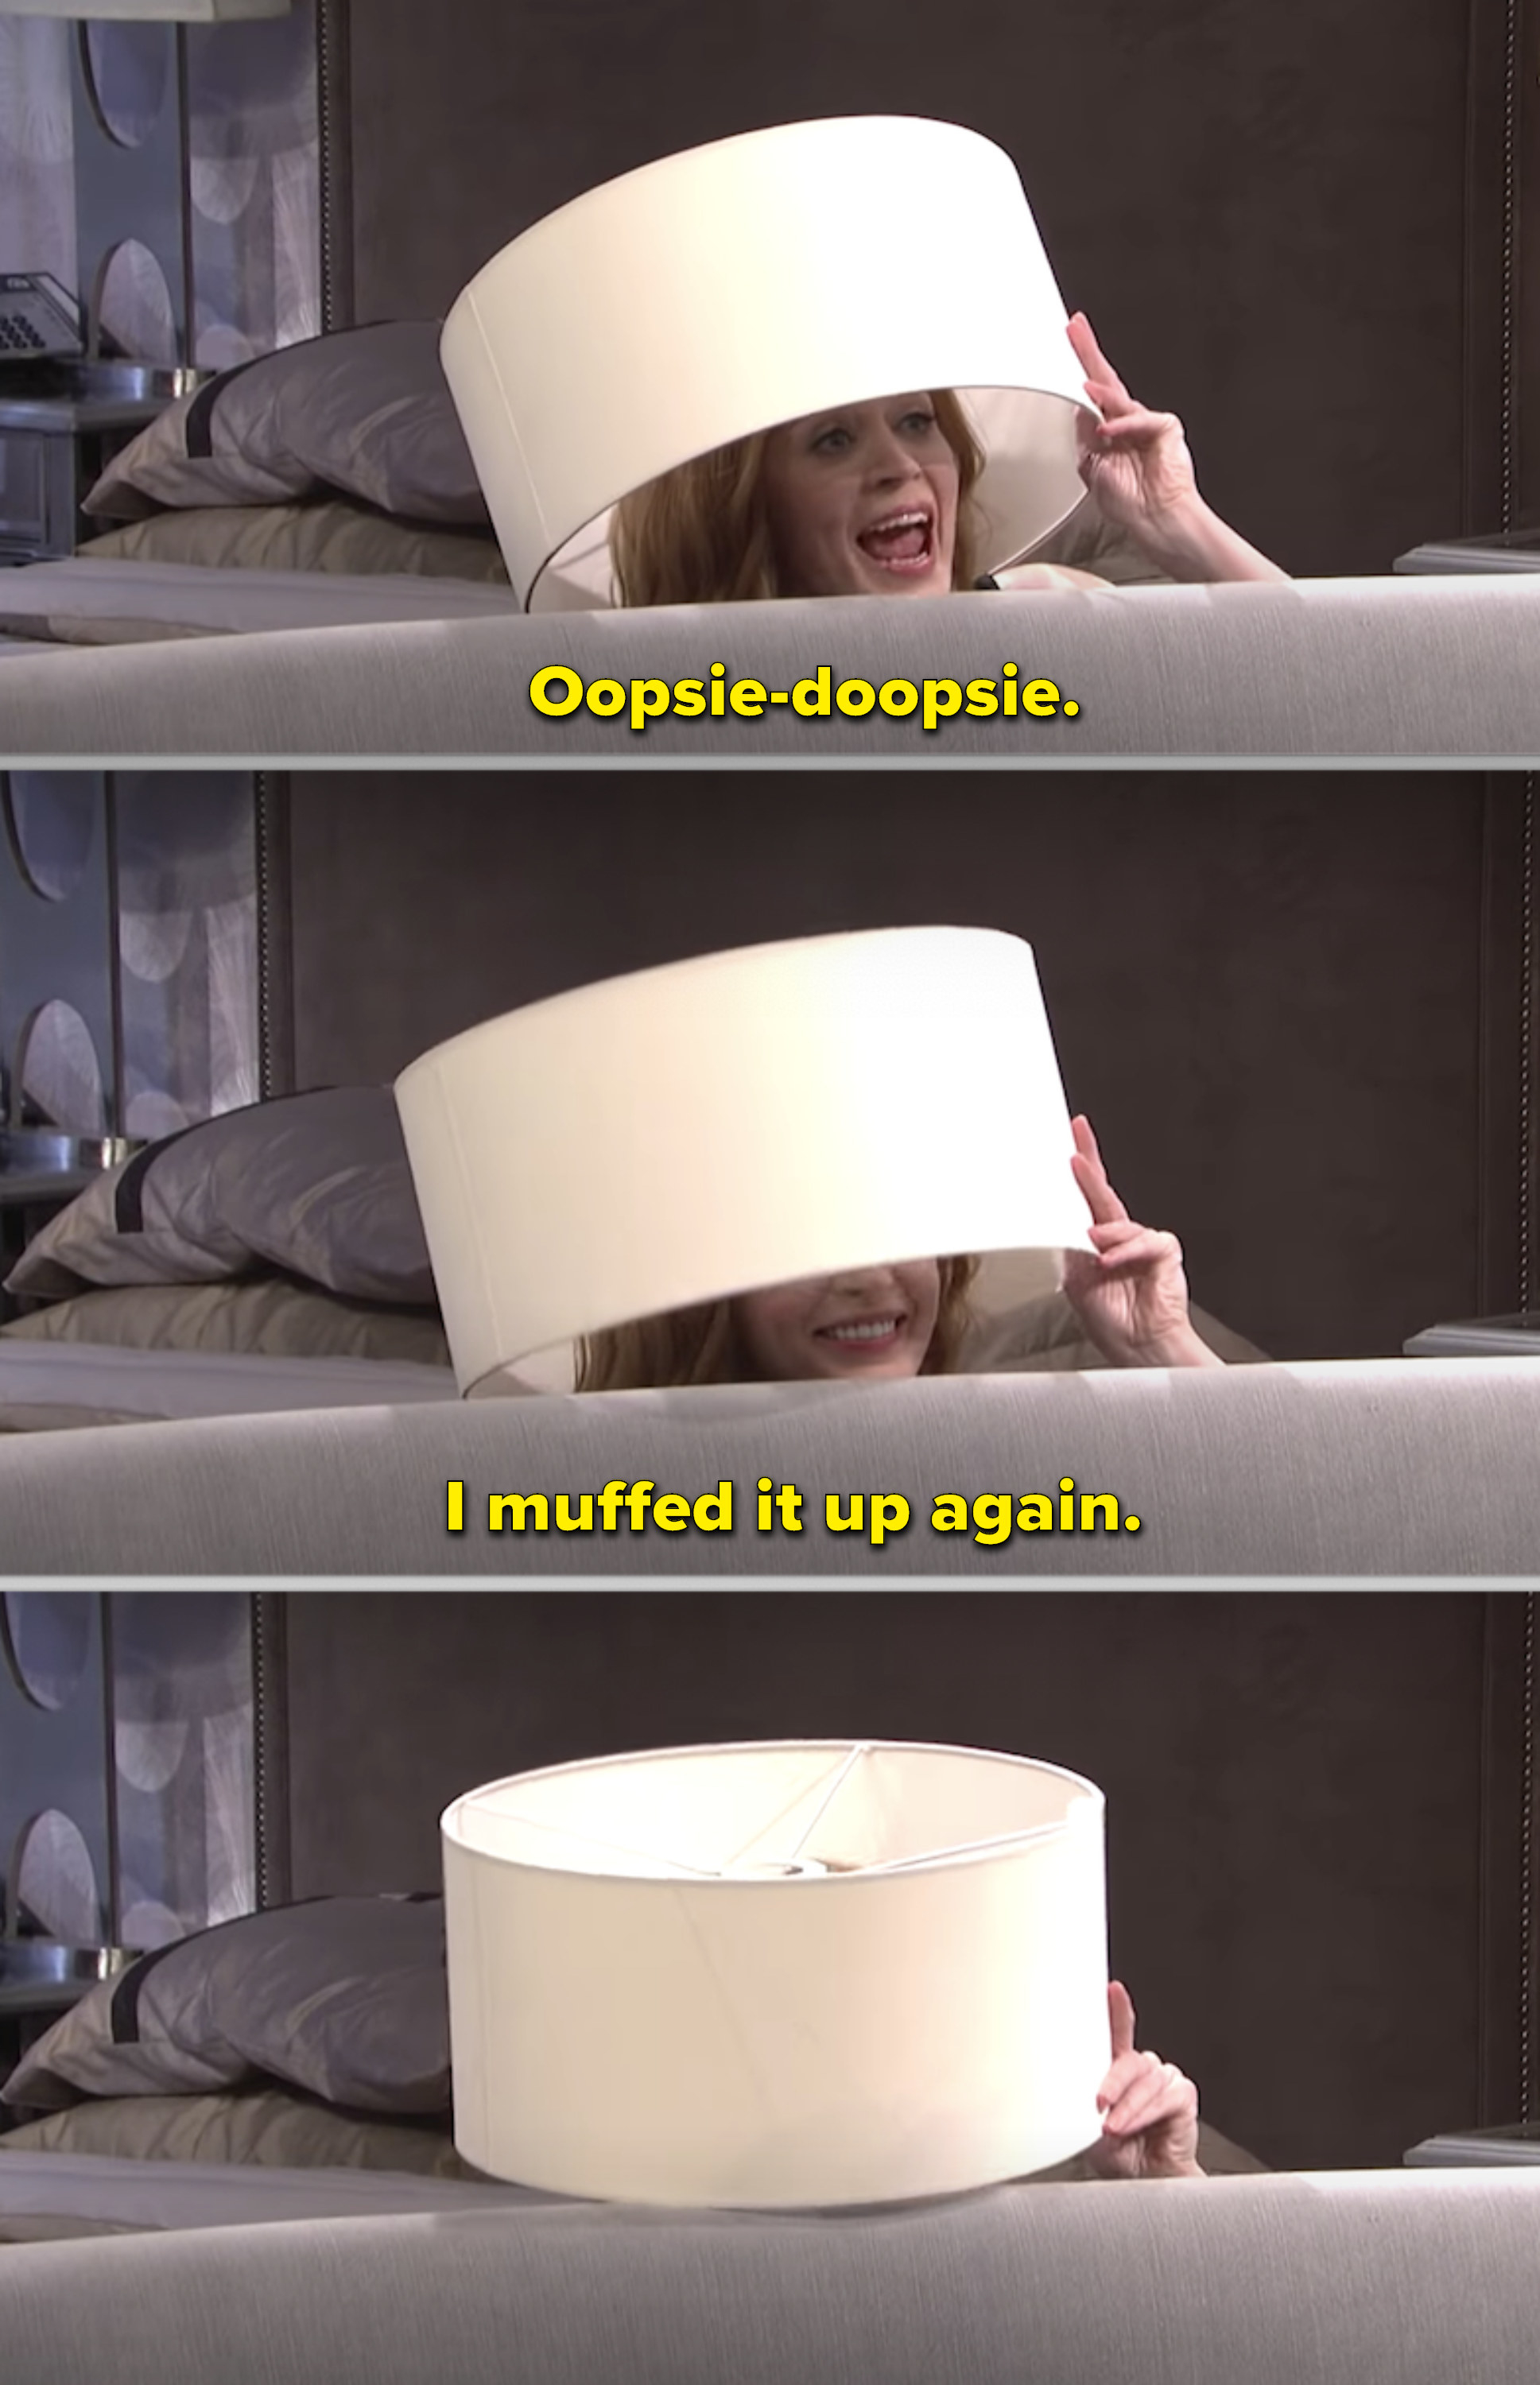 Emily Blunt hiding her face under a lampshade 